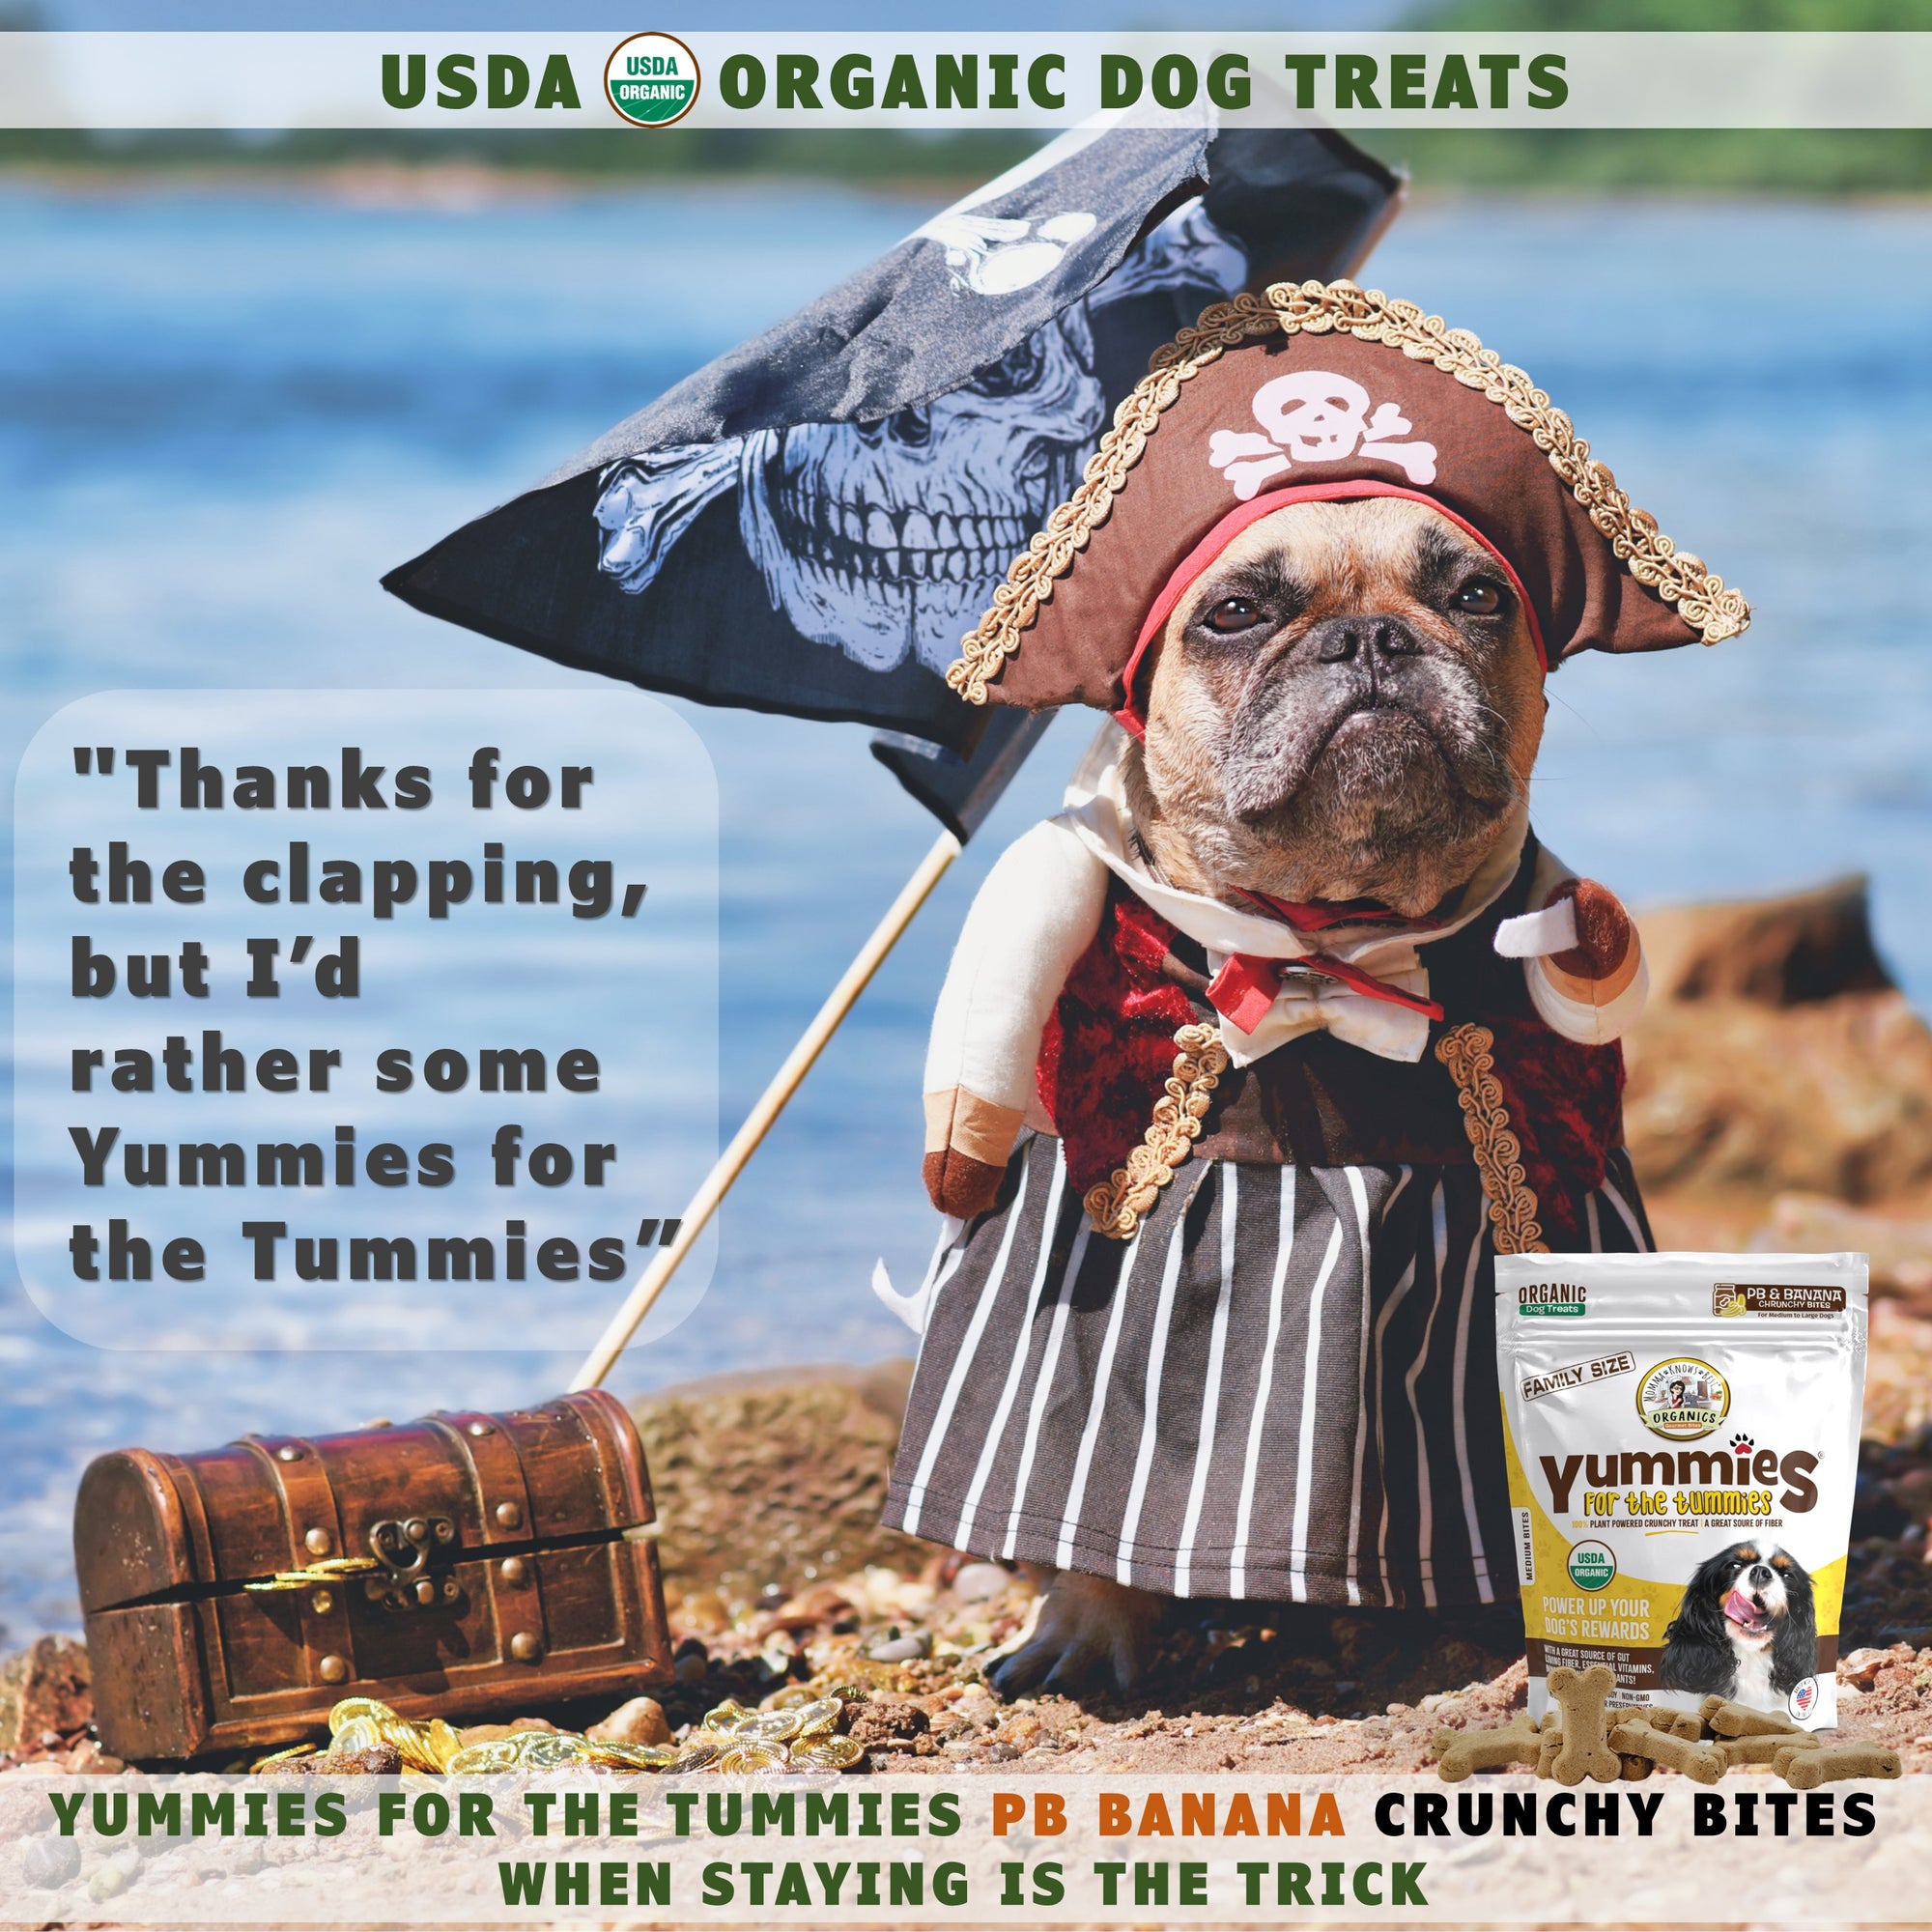 A dog wearing a pirate costume next to a small chest and a bag of organic PB & Banana dog treats for training Yummies for the Tummies by Momma Knows Best